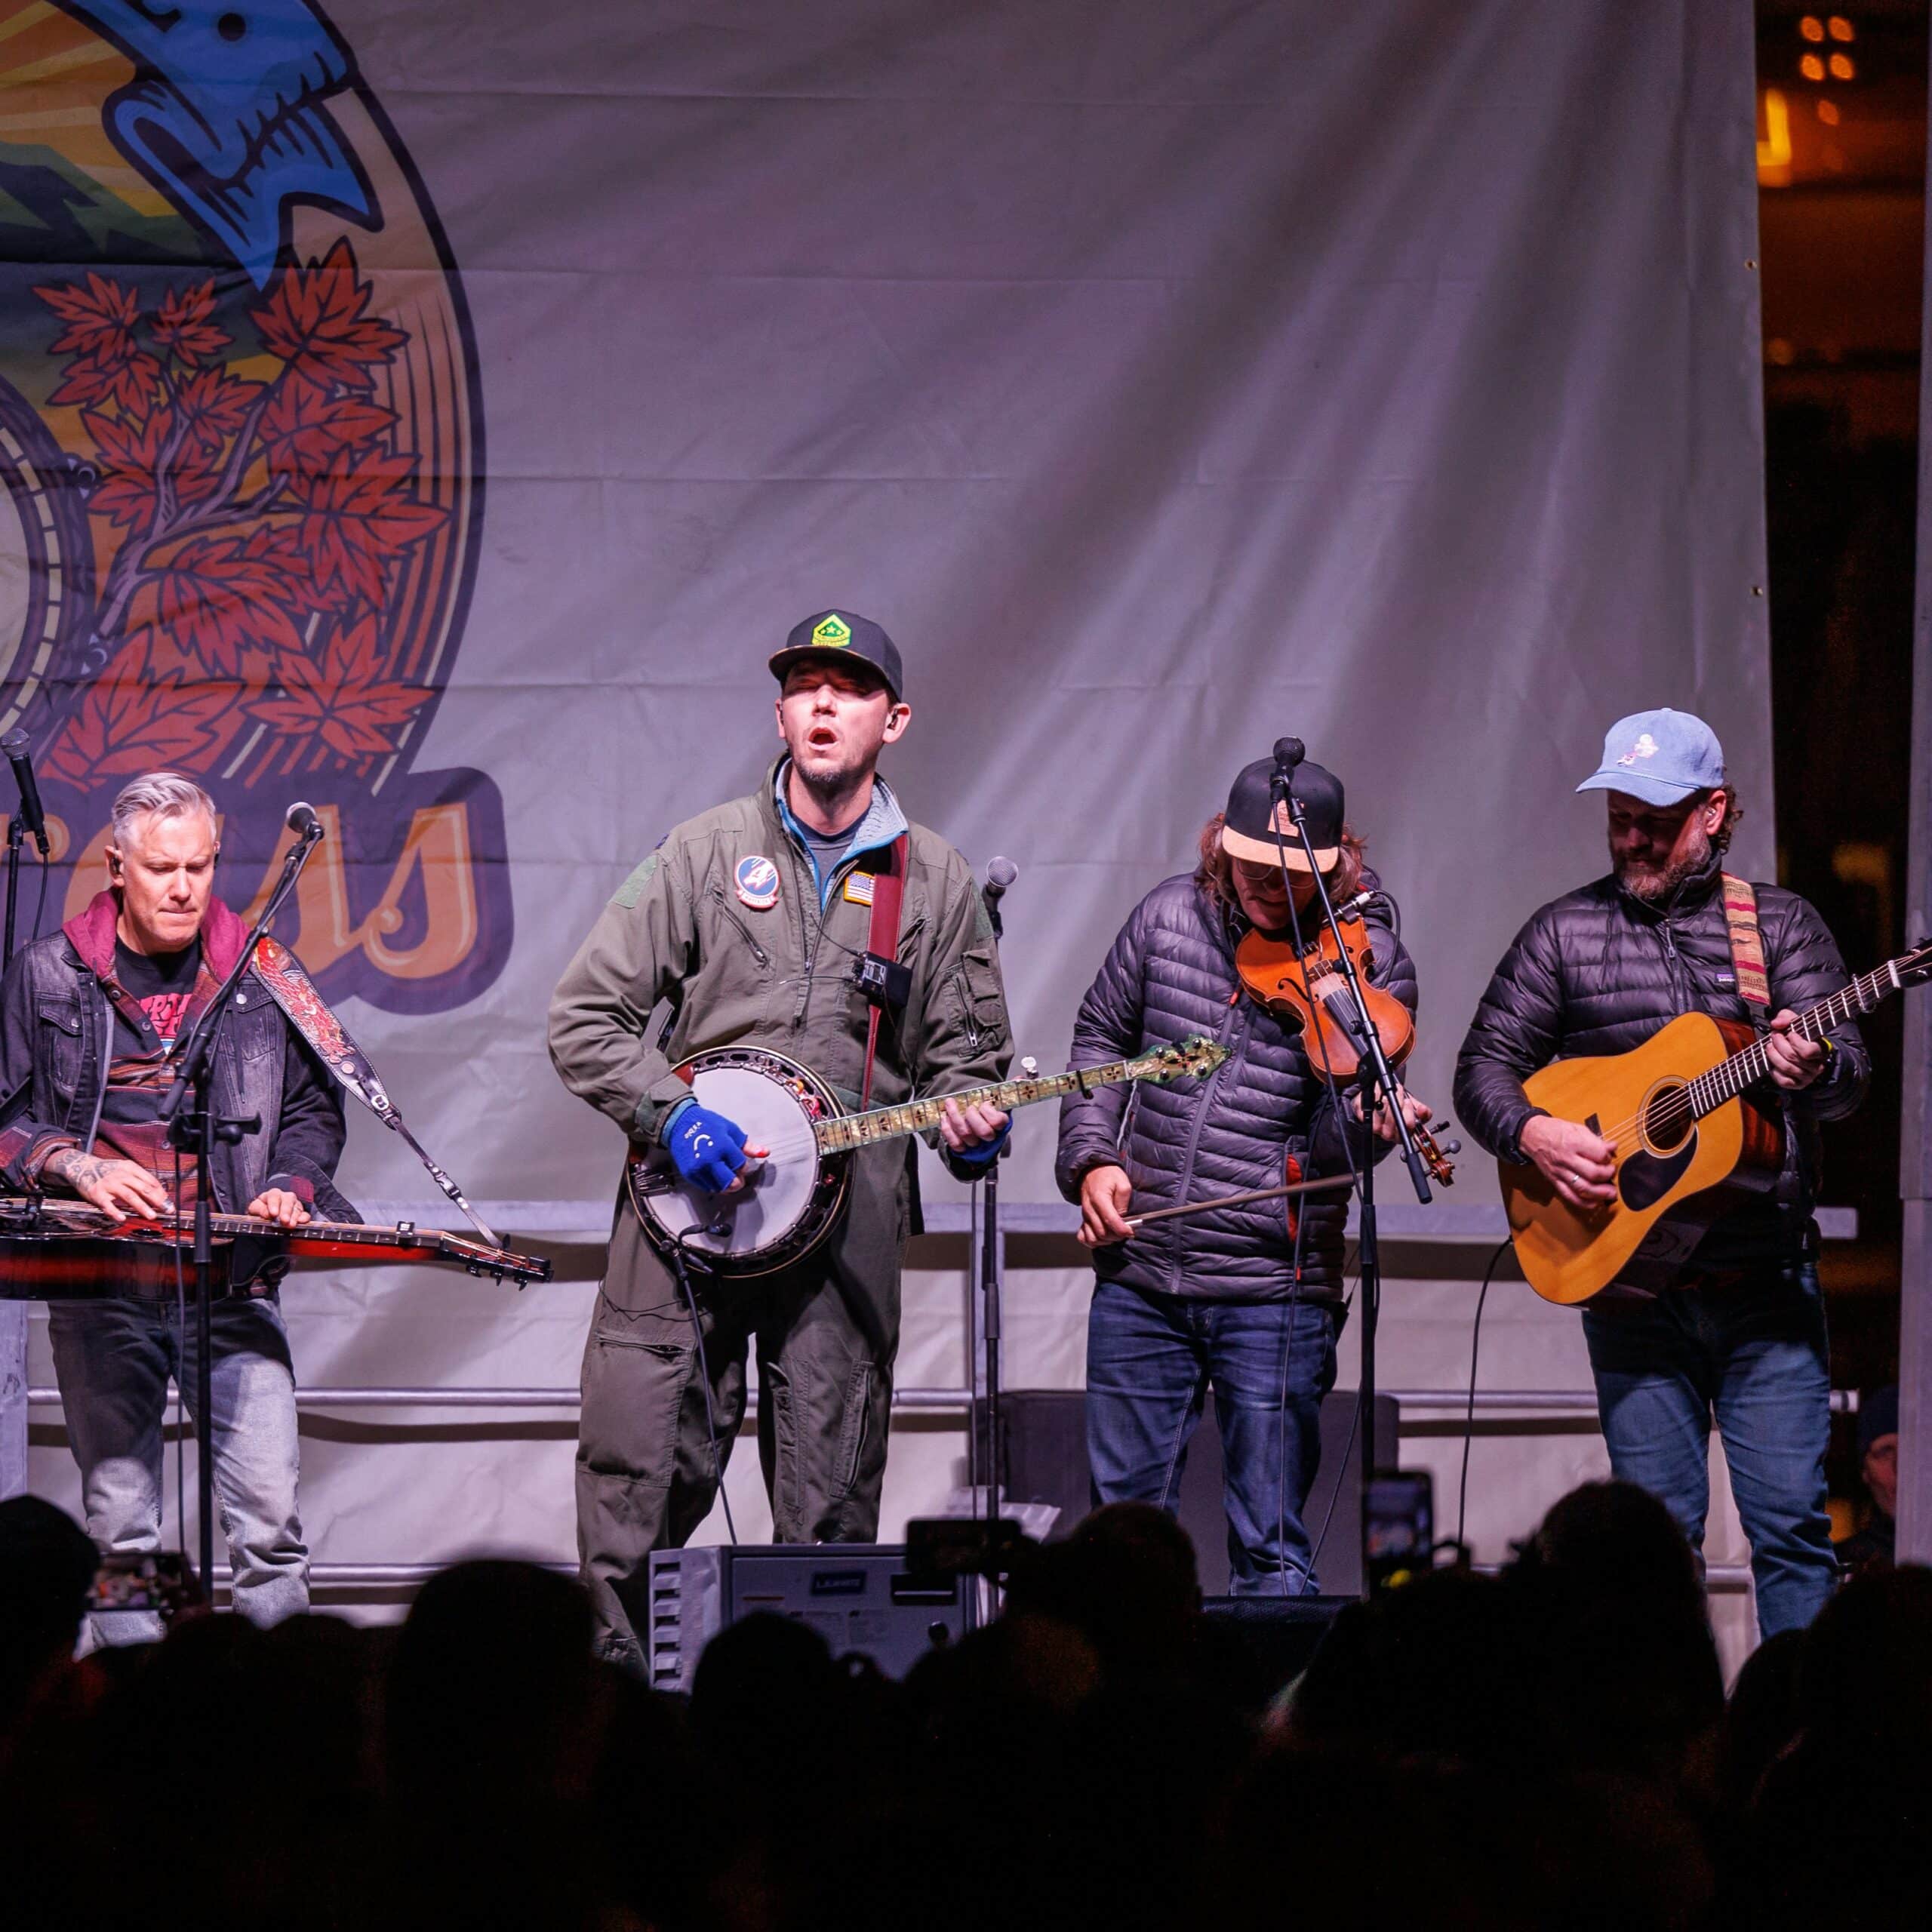 A group of men playing banjos and guitars on a stage.